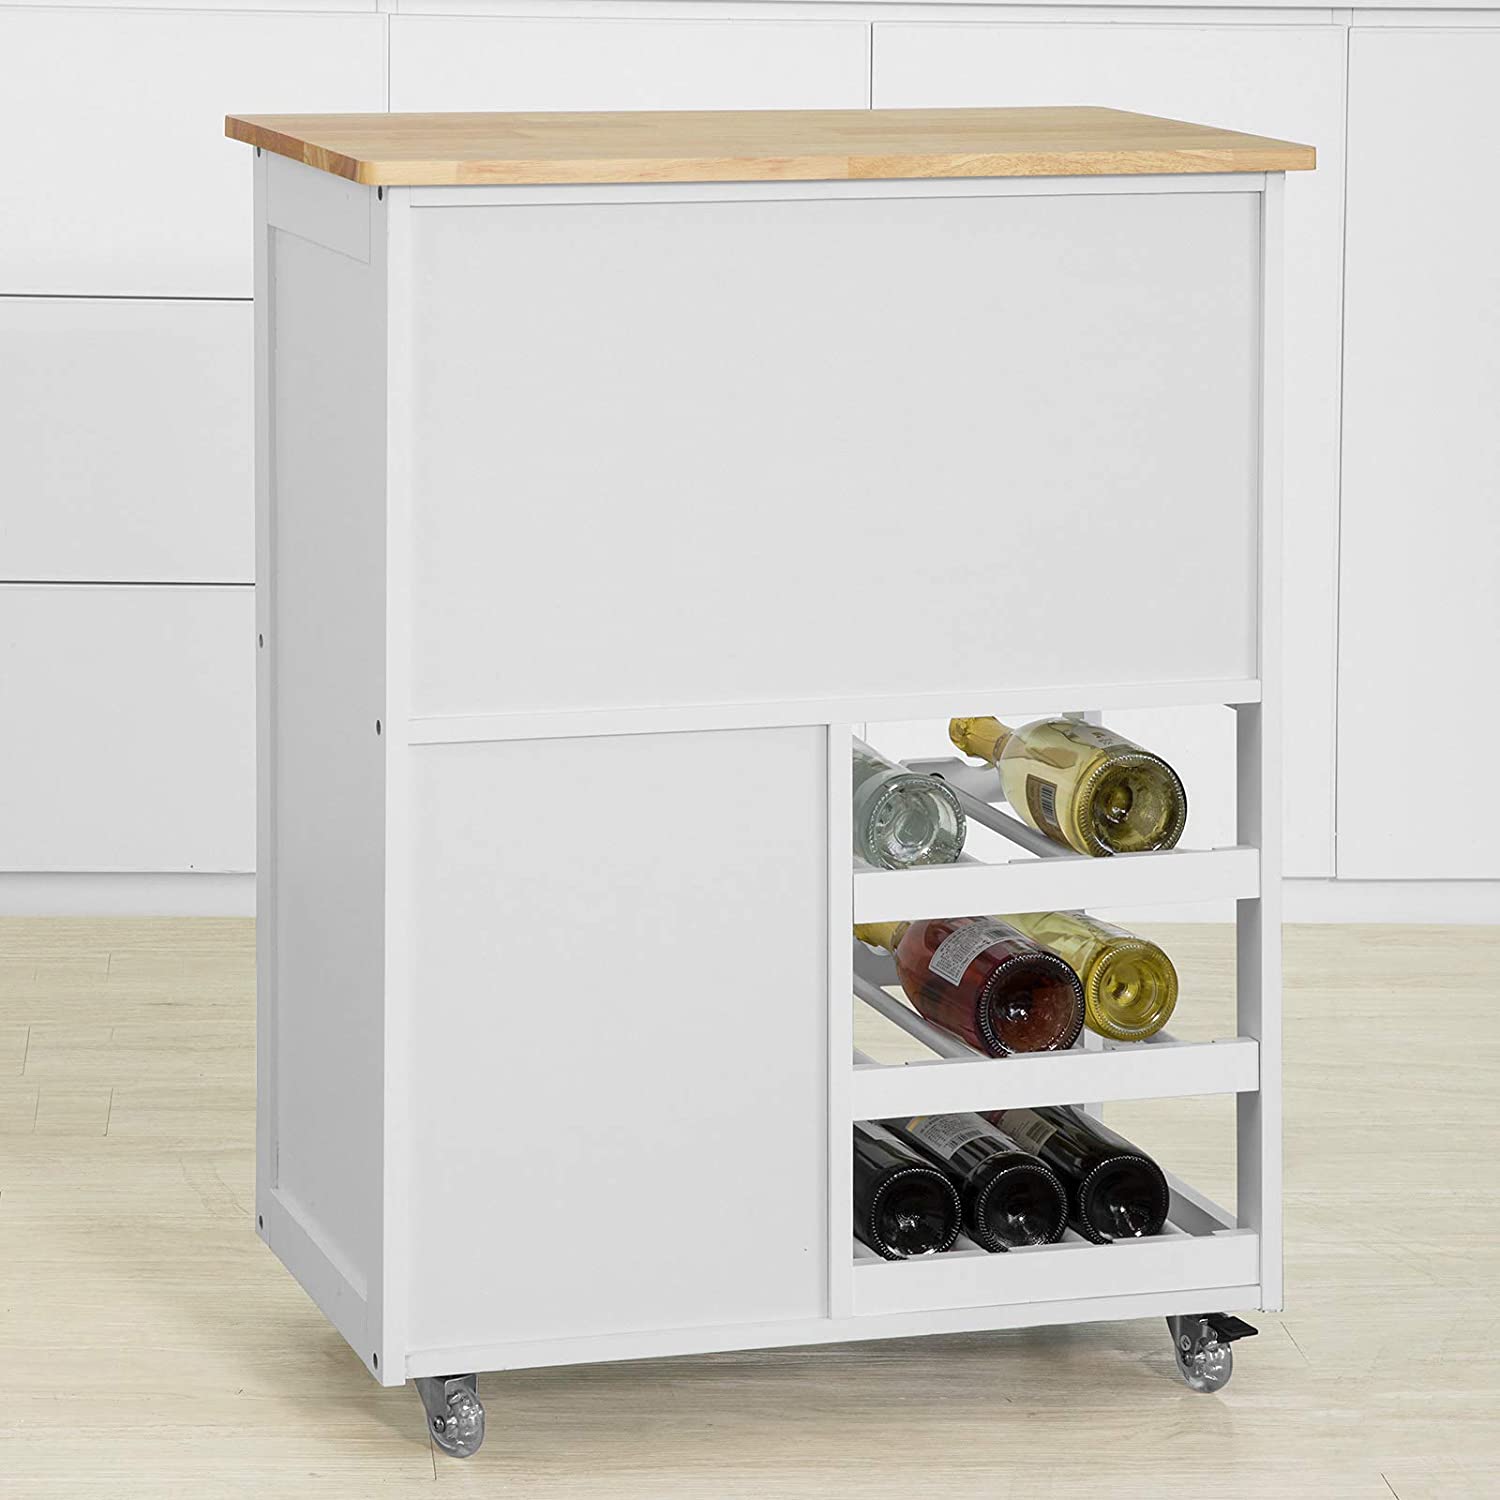 Kitchen Trolley with Wine Racks, Portable Workbench and Serving Cart for Bar or Dining - image5